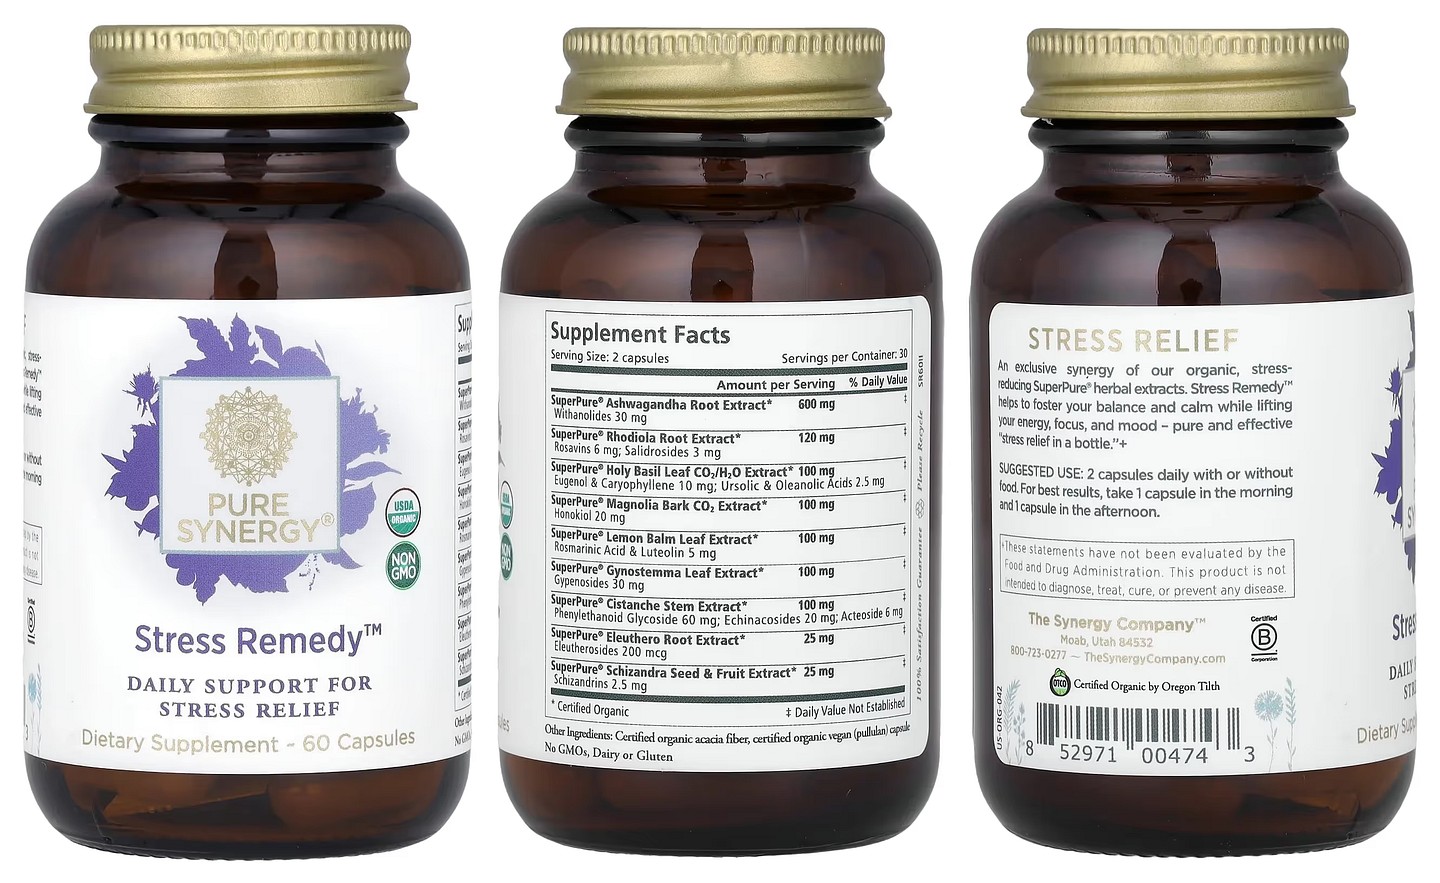 Pure Synergy, Stress Remedy packaging